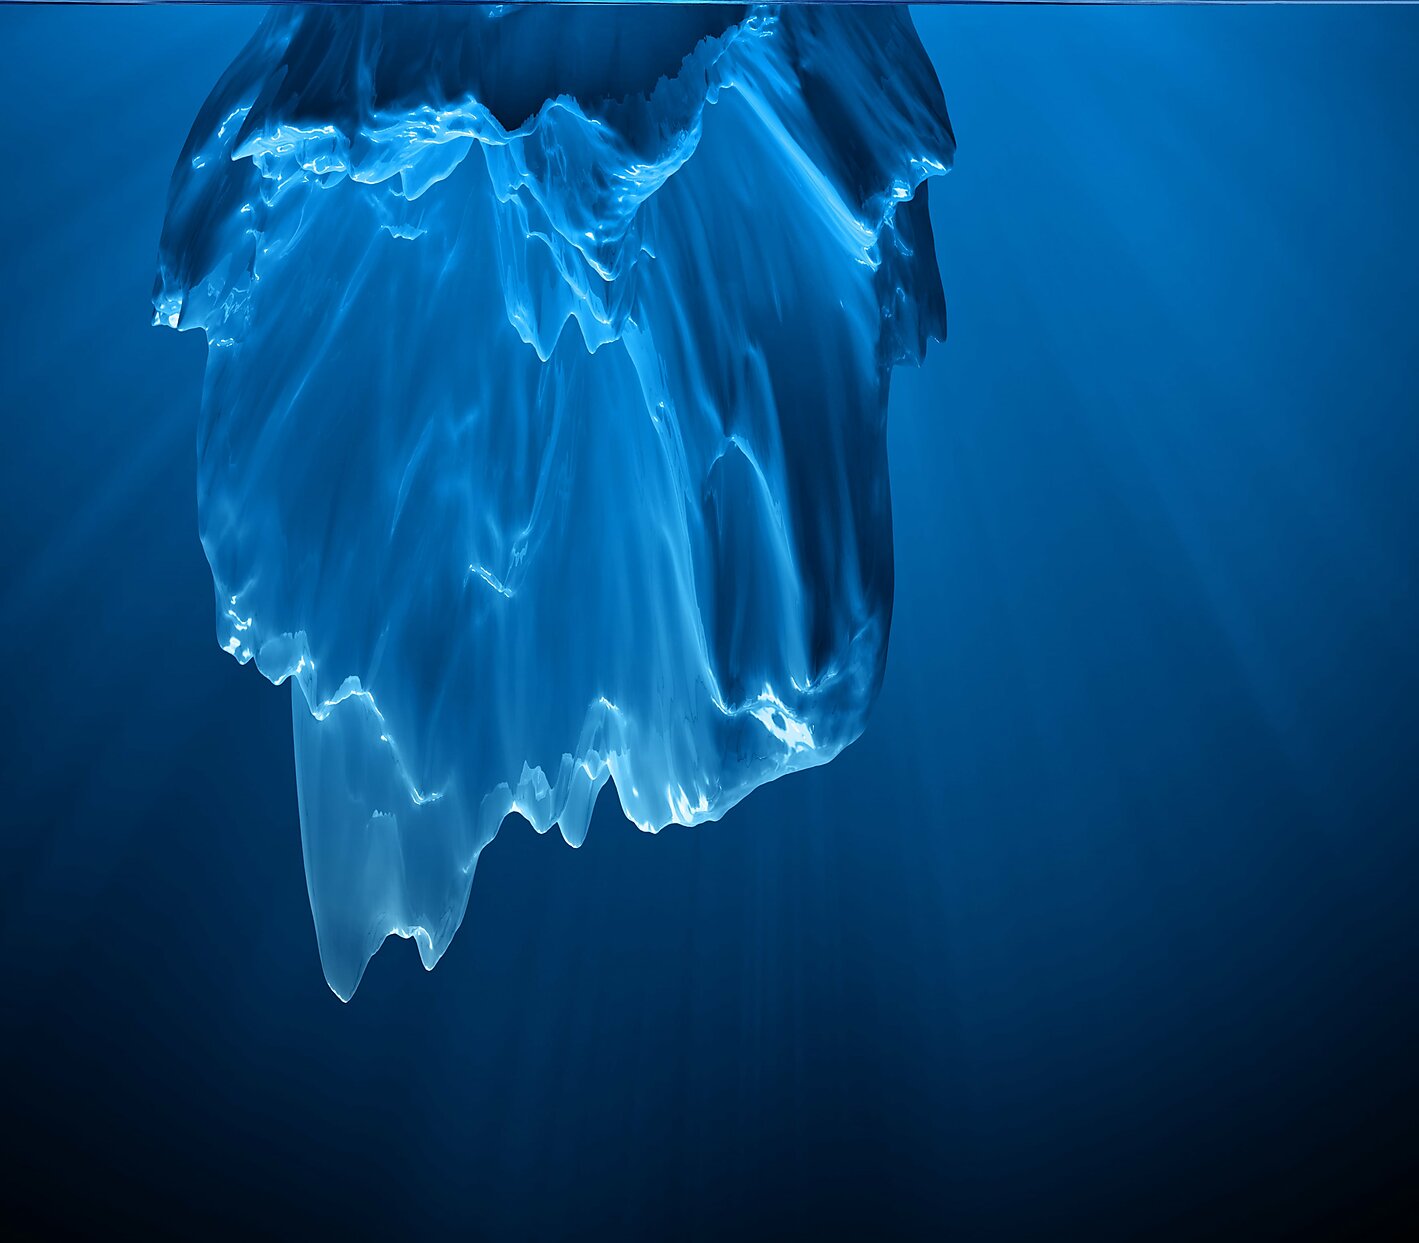 The underwater portion of an iceberg